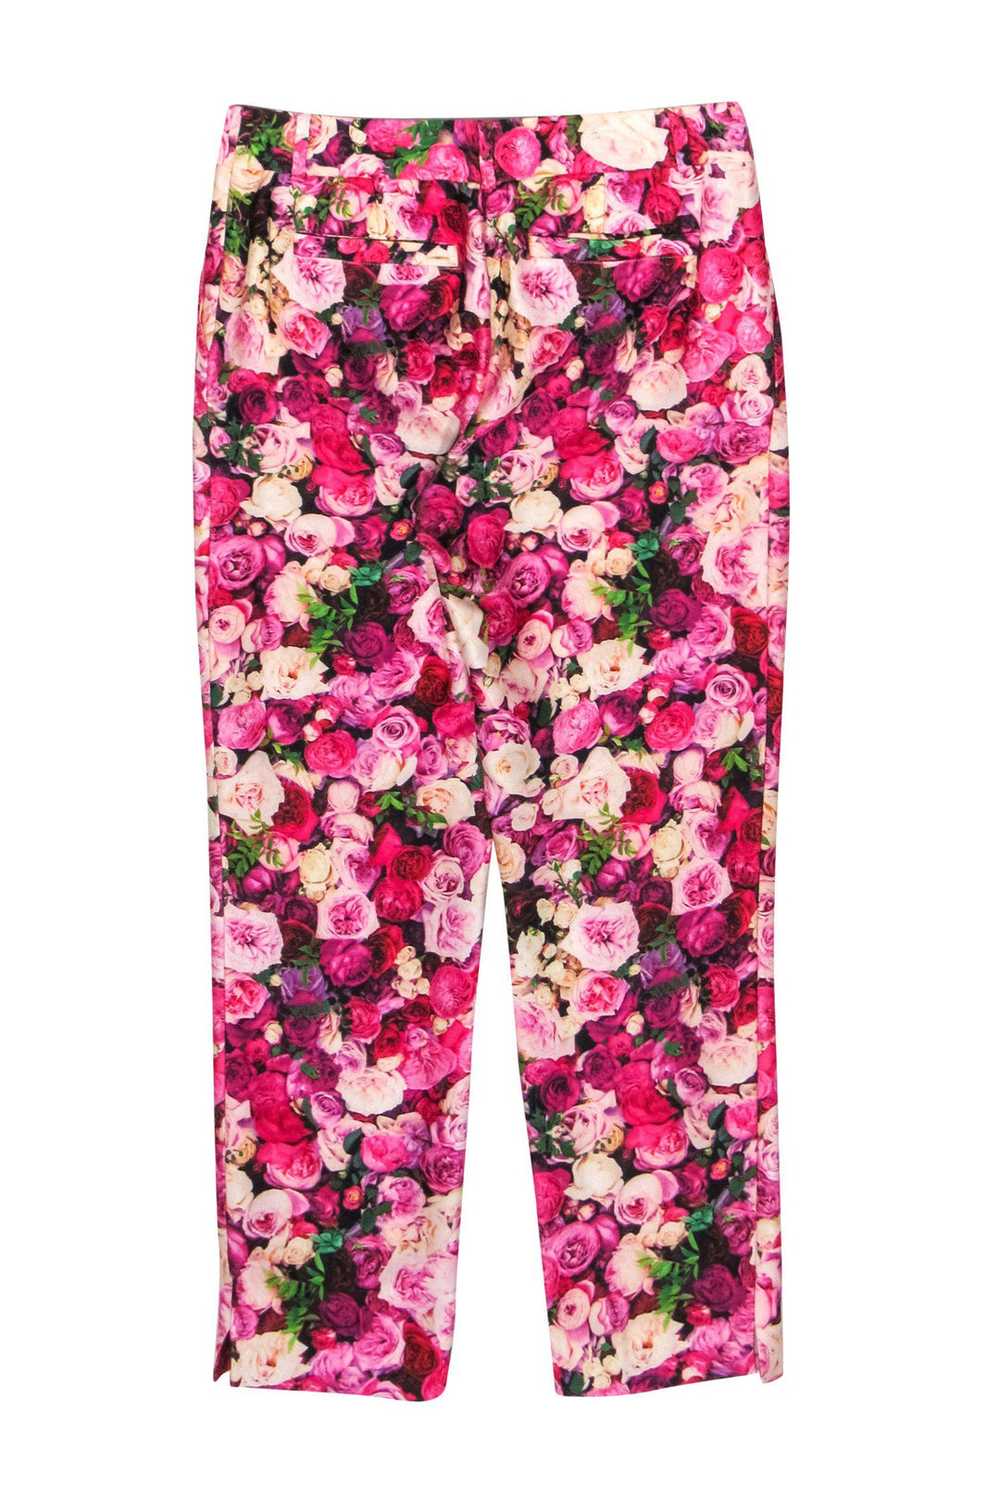 Kate Spade - Pink Floral Print Tapered Trousers S… - image 2